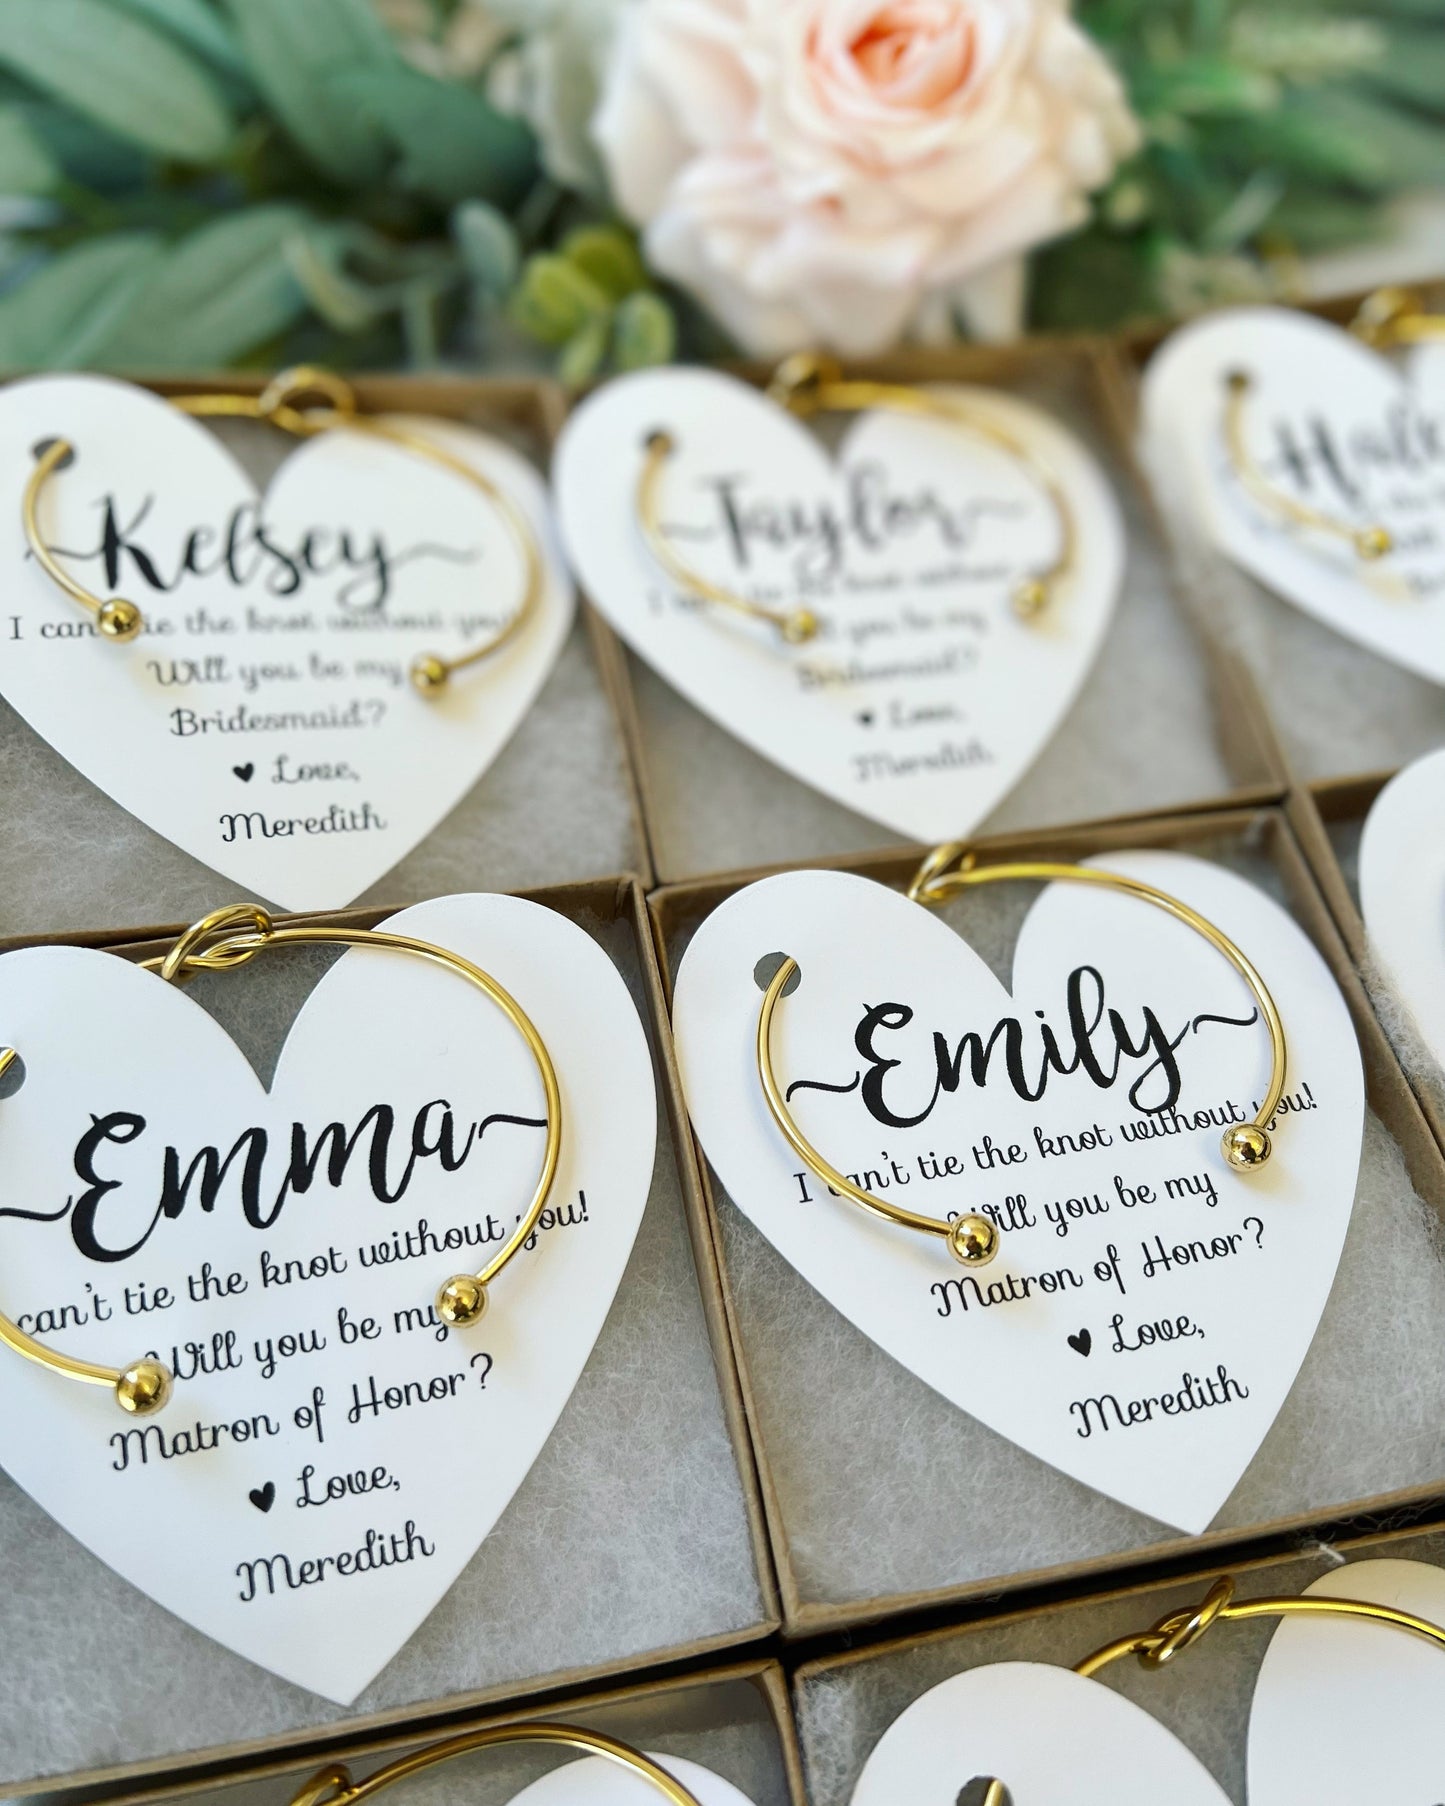 Bridal Party Gift! We Will Bring the Reason, You Bring the Party